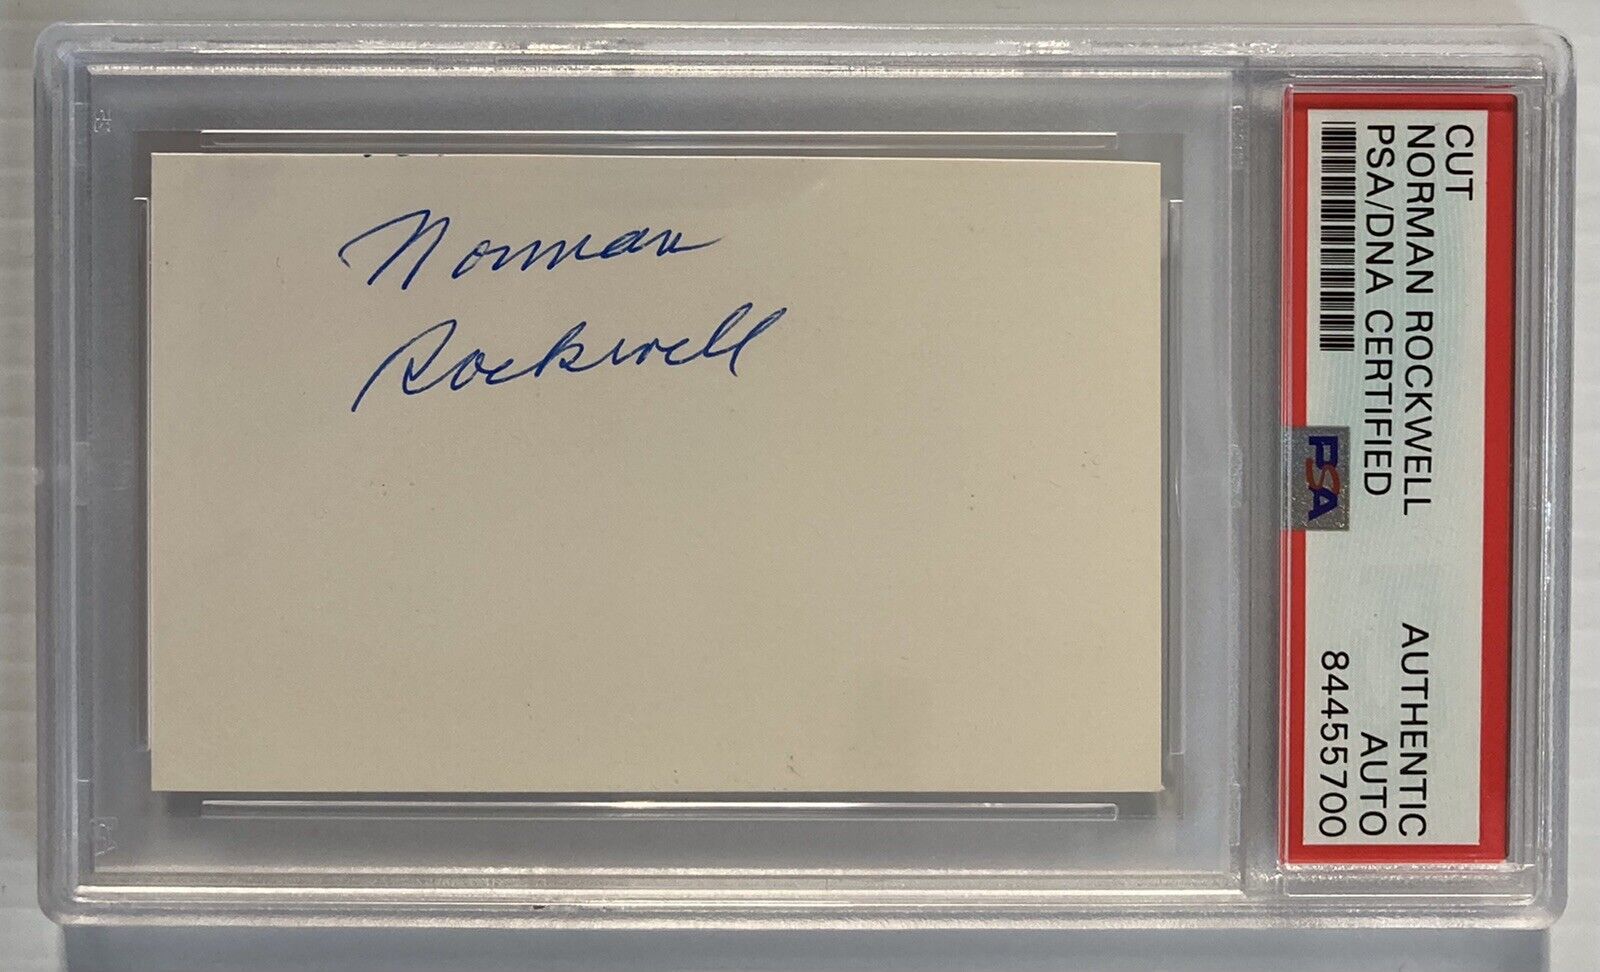 Norman Rockwell Signed Autograph 2.25 x 3.25 Cut Signature - PSA DNA - FREE S&H